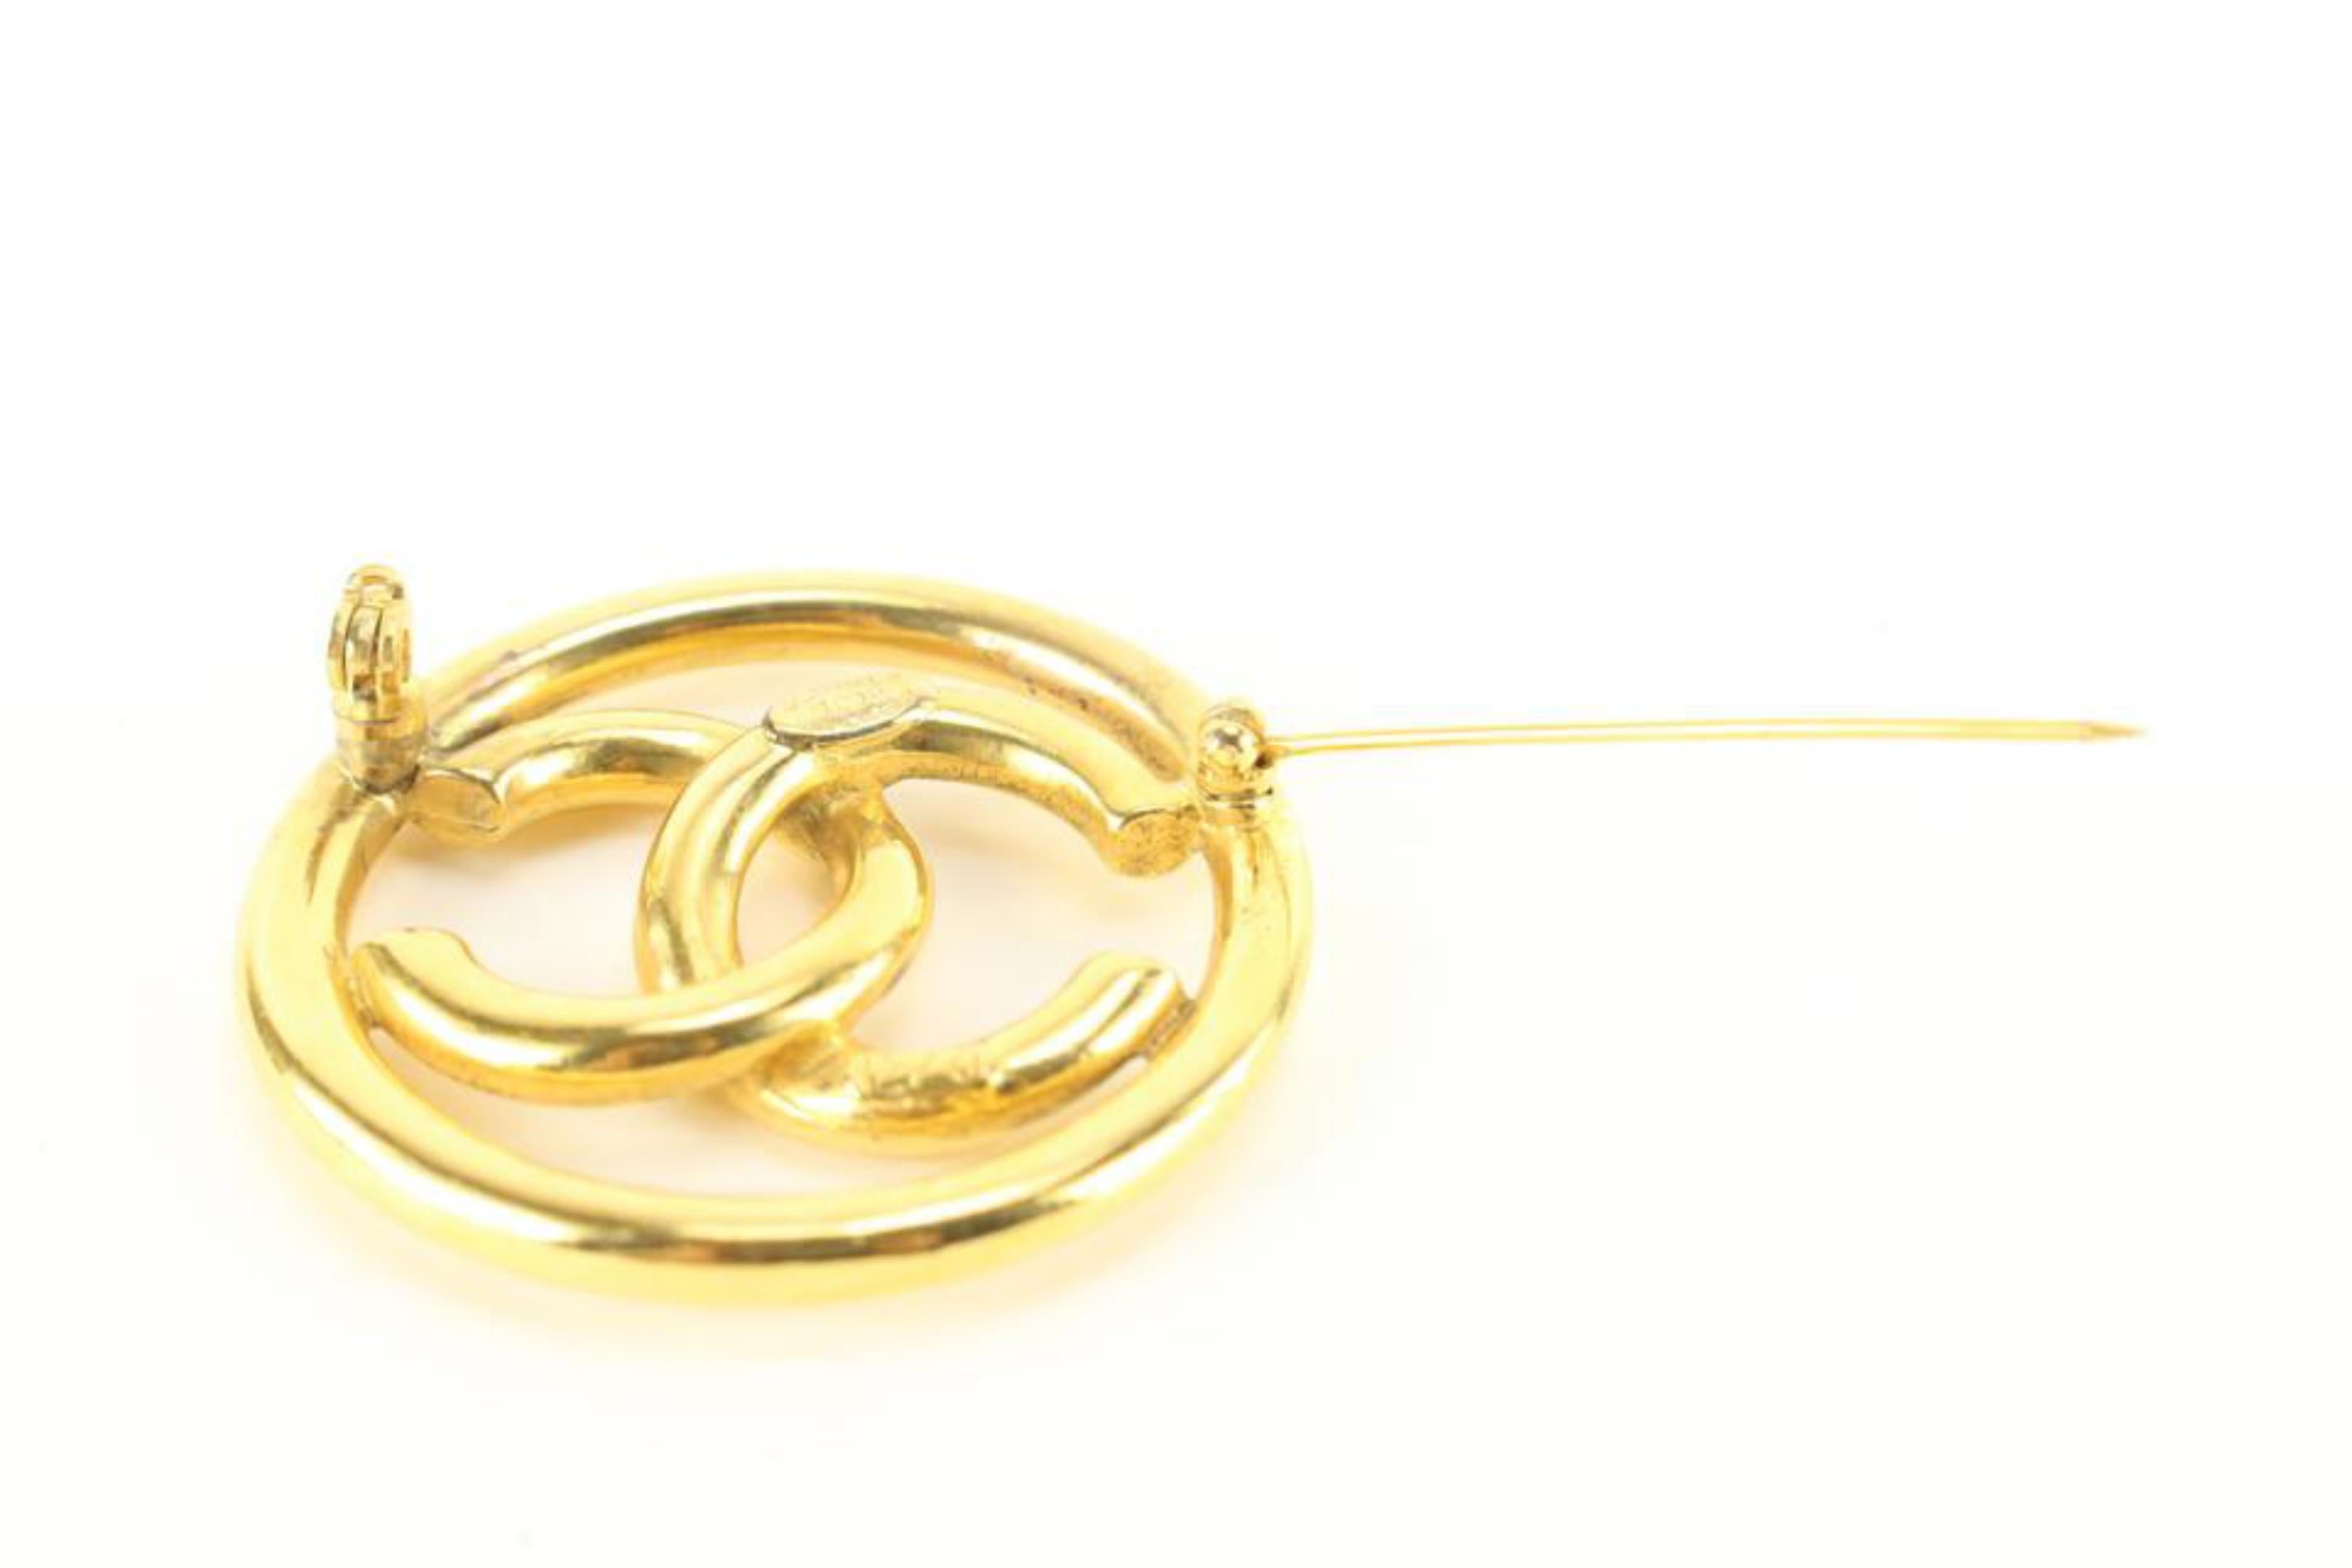 Cc pin & brooche Chanel Gold in Metal - 30203087